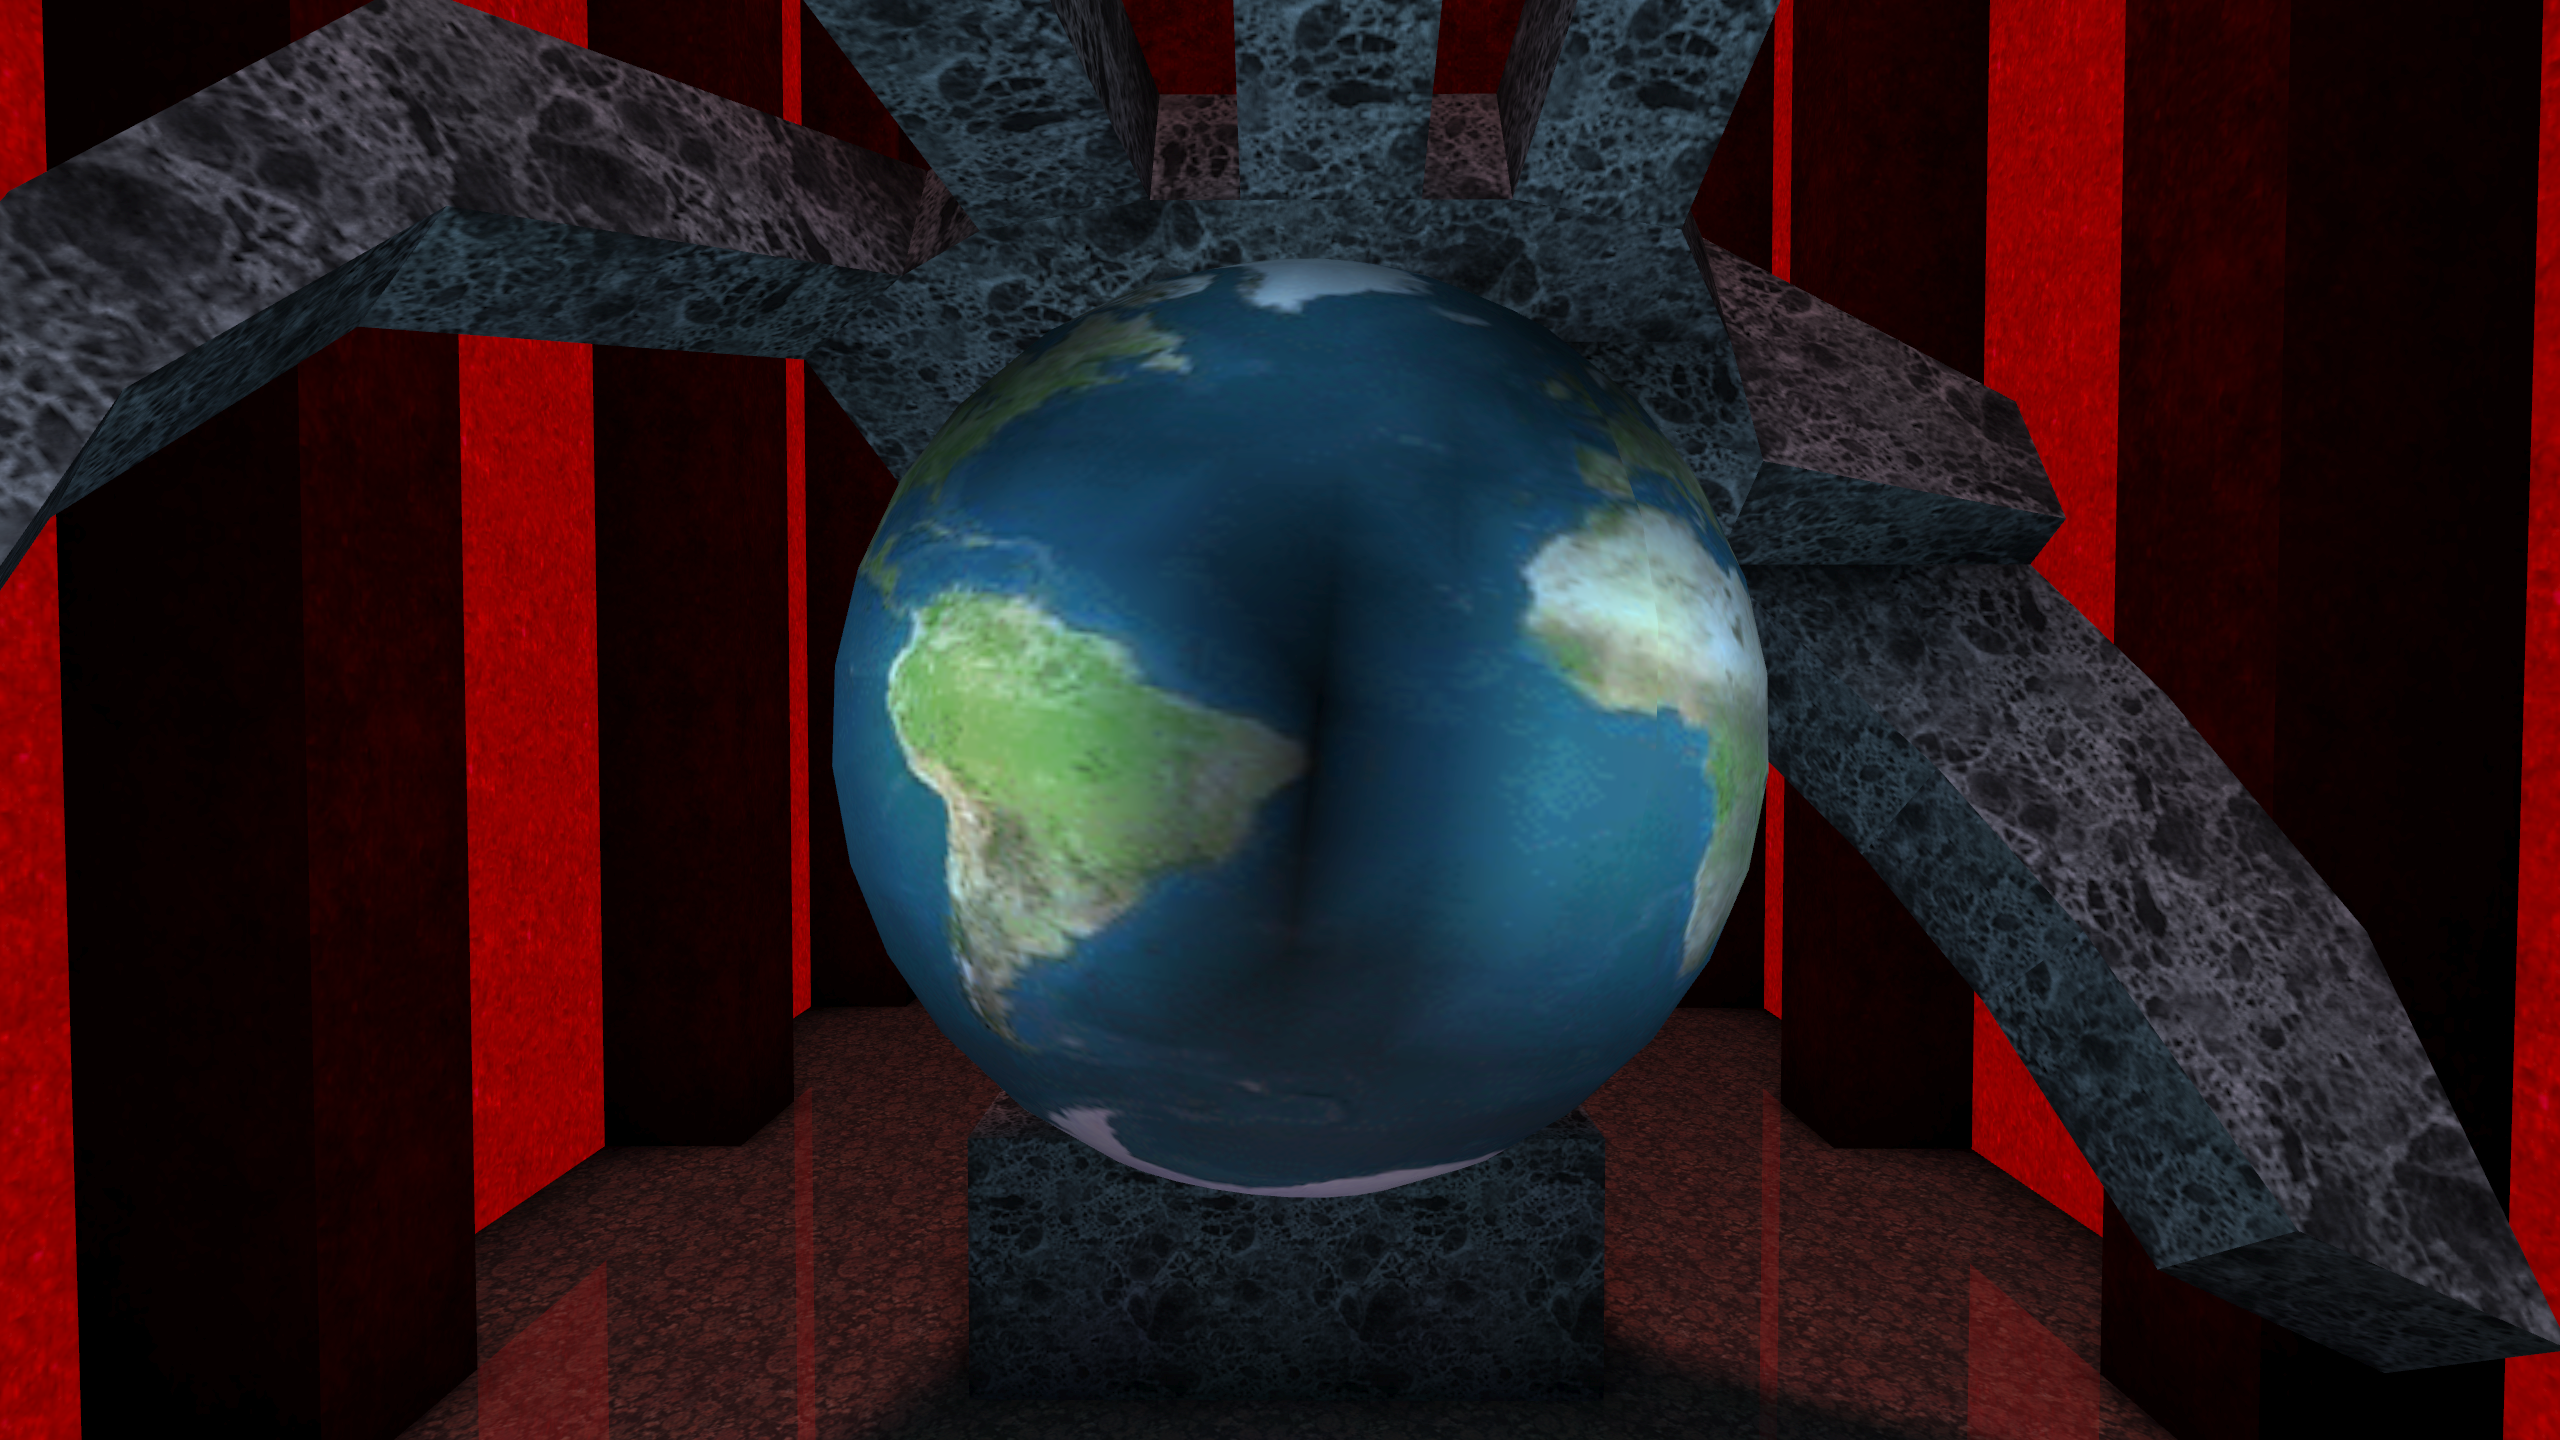 Screenshot of the game. A globe model floating in a red walled room, being reached for by a stone hand.